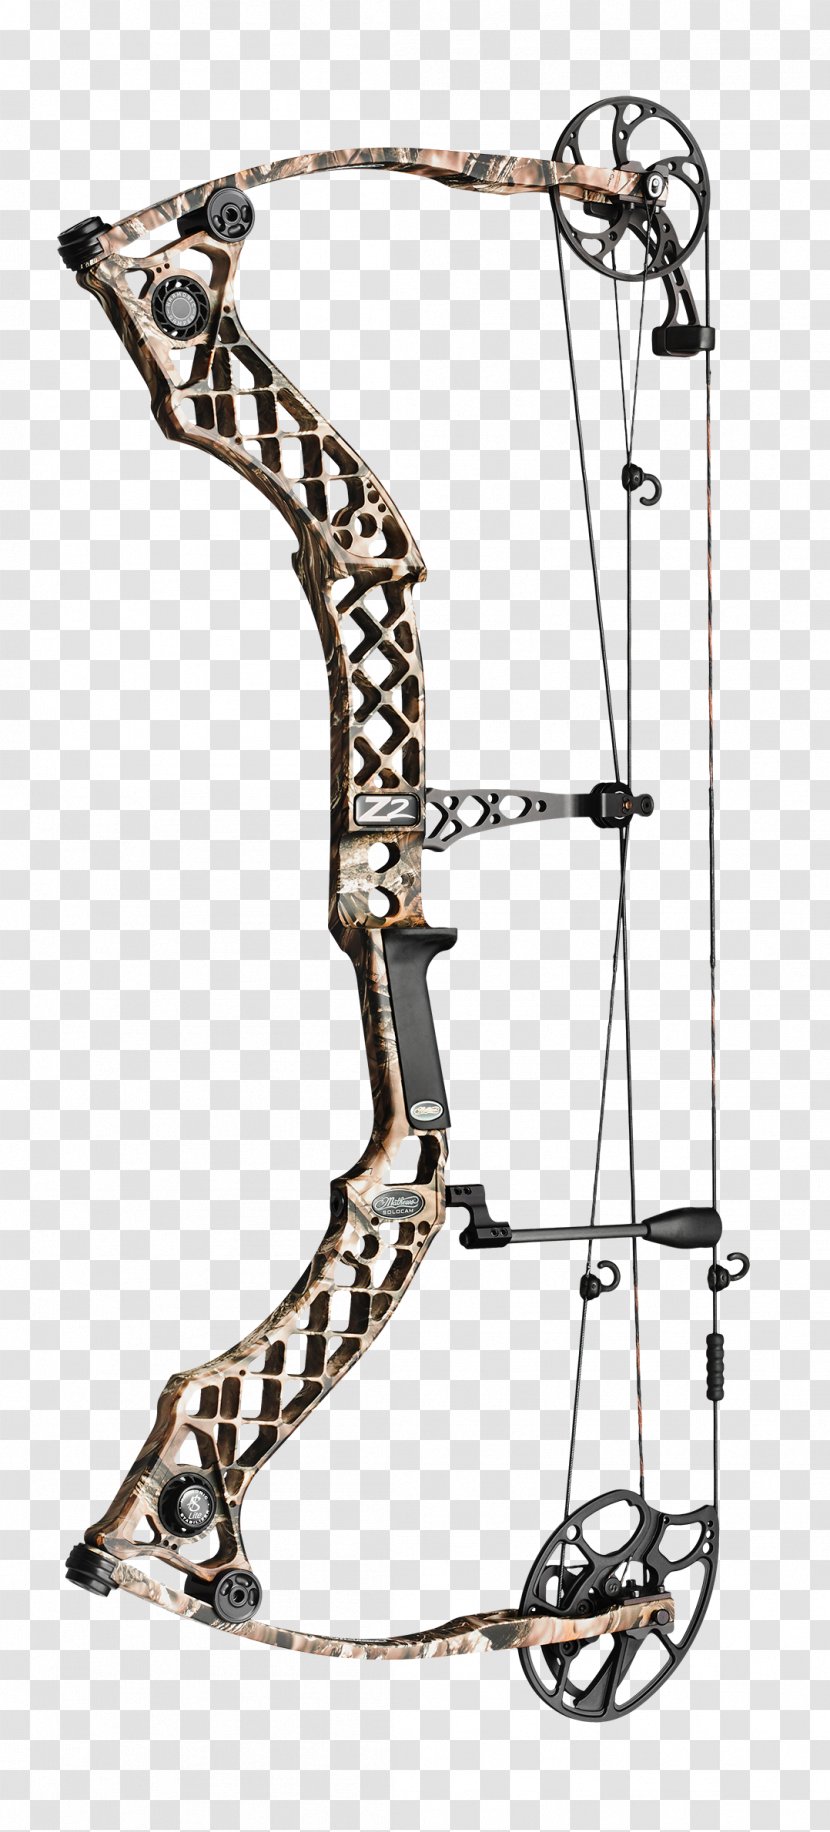 Compound Bows Archery Bow And Arrow Bowhunting - Ranged Weapon - Puppies Transparent PNG